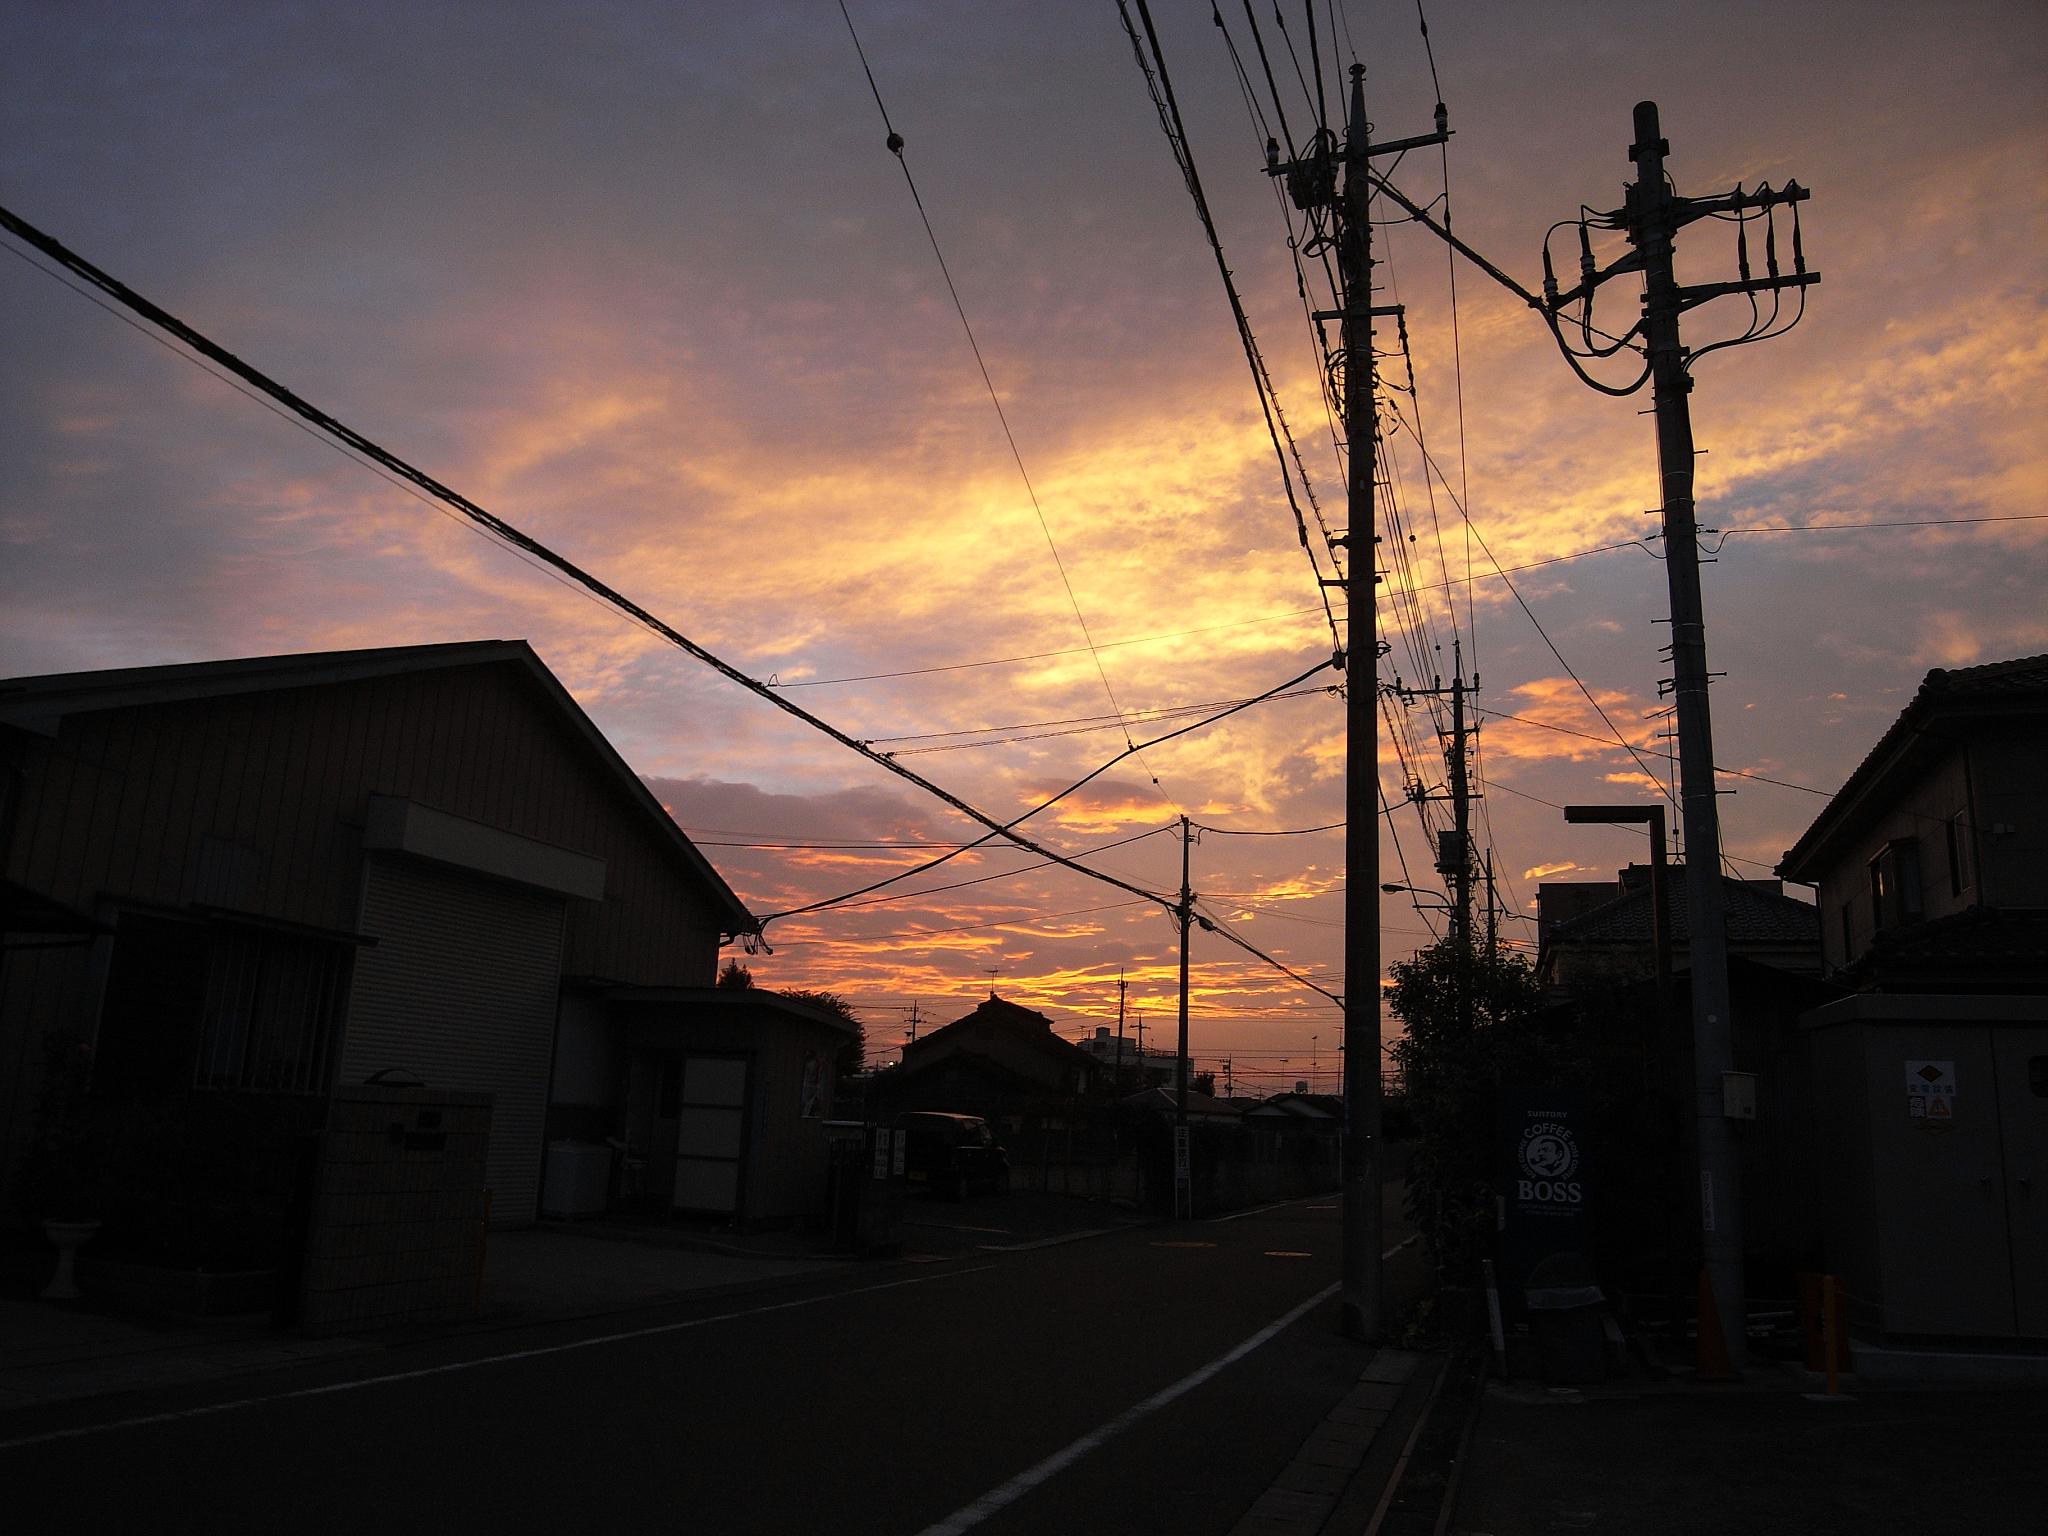 a view of sunset from an alley way